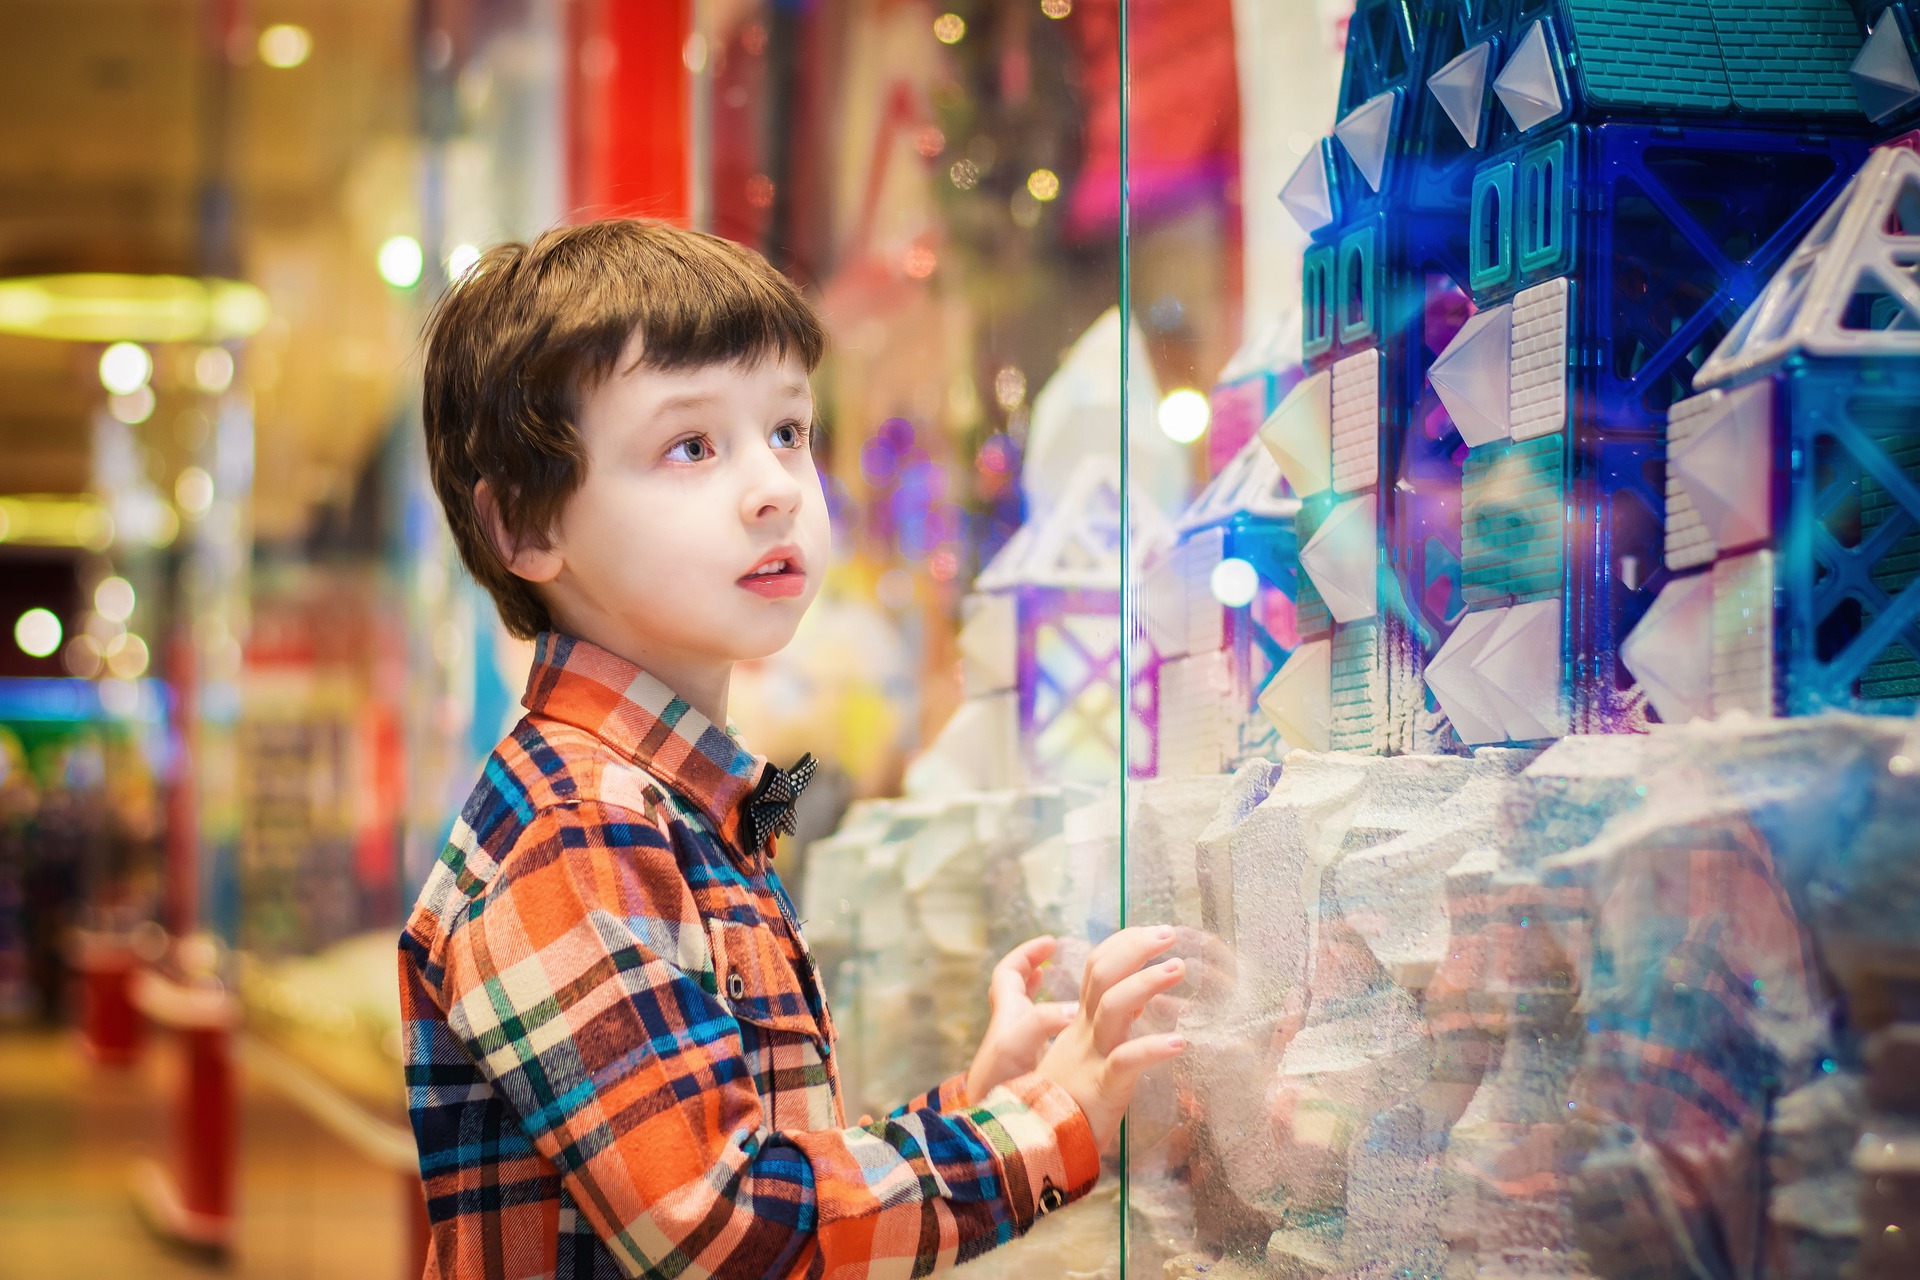 A child looking longingly through a store window